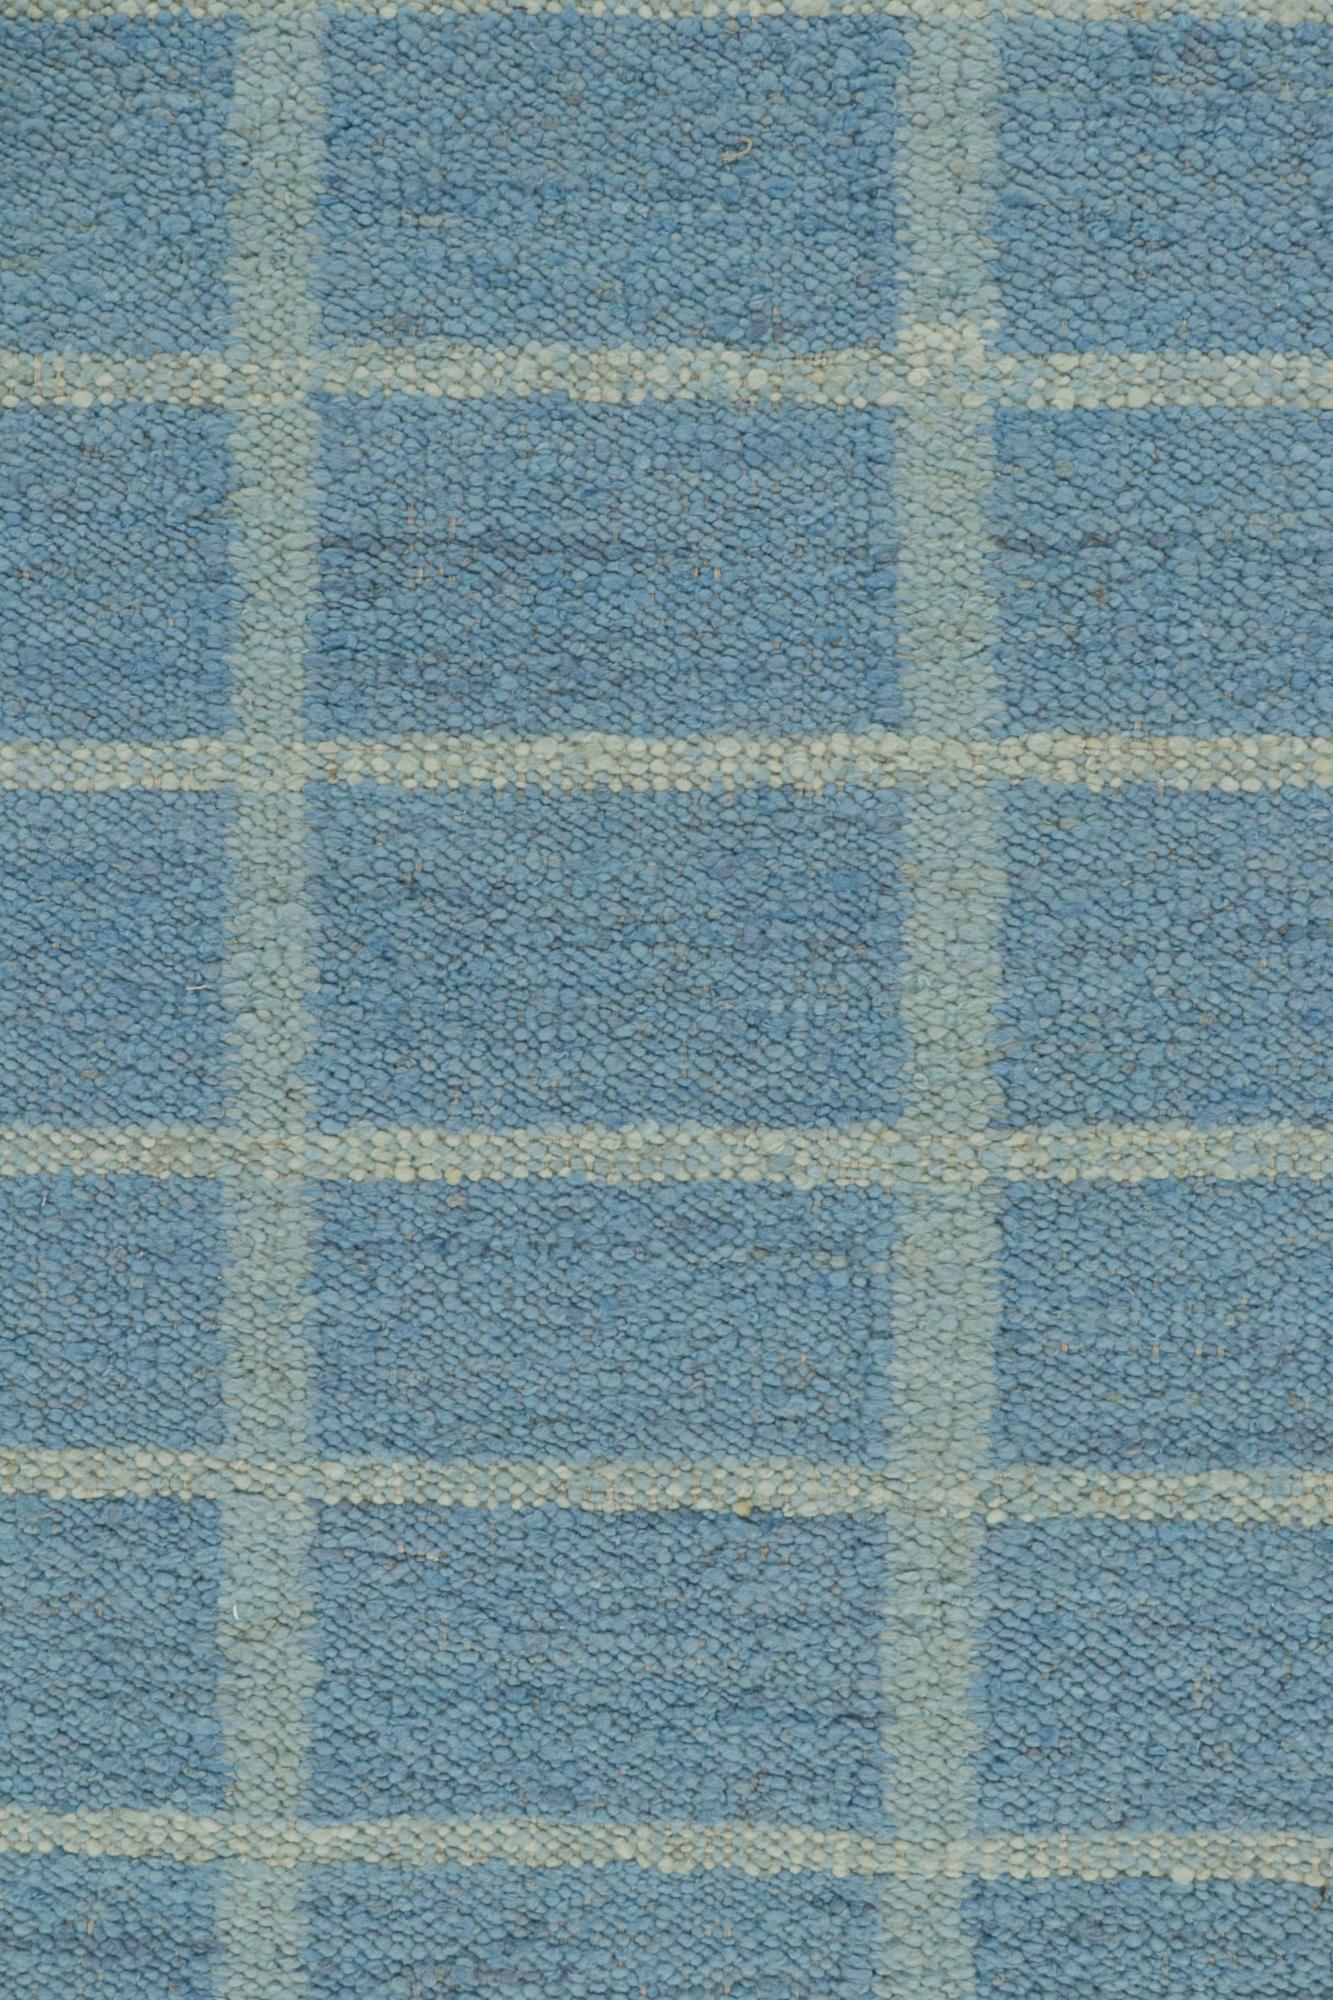 Rug & Kilim’s Custom Scandinavian Style Kilim in Tones of Blue & White In New Condition For Sale In Long Island City, NY